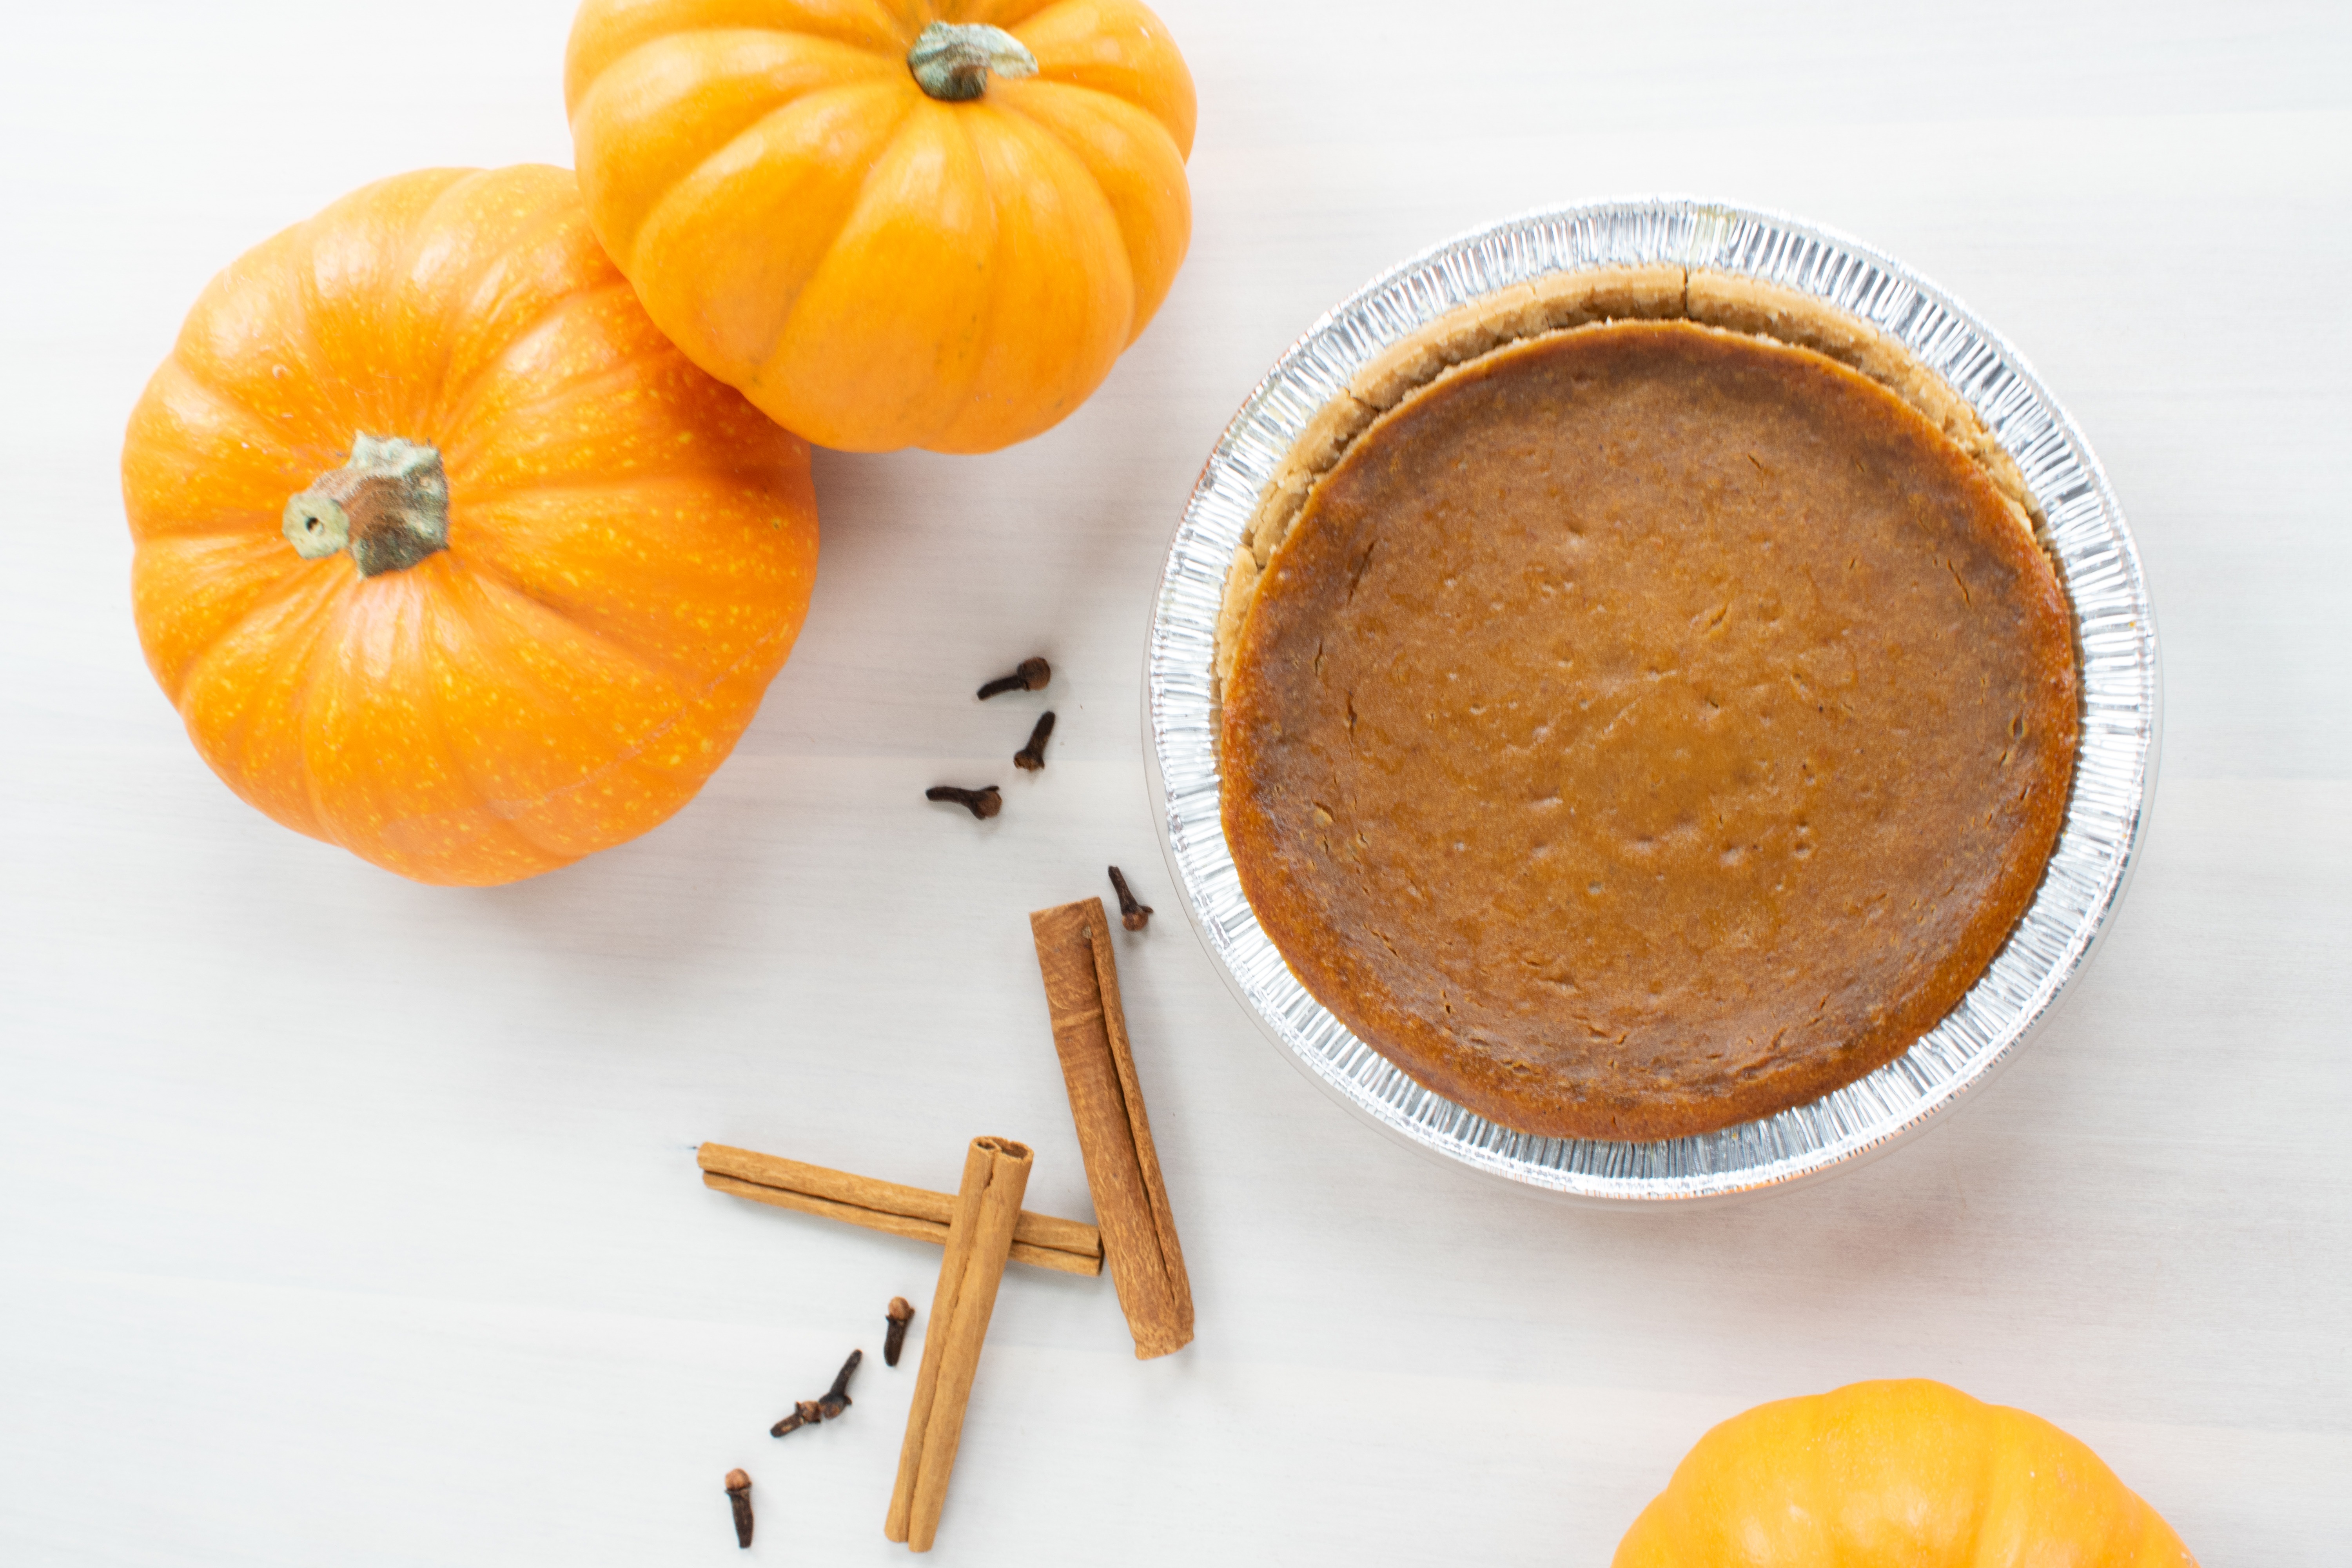 Raised Gluten Free Bakes Up a New Pumpkin Pie for Fall 160